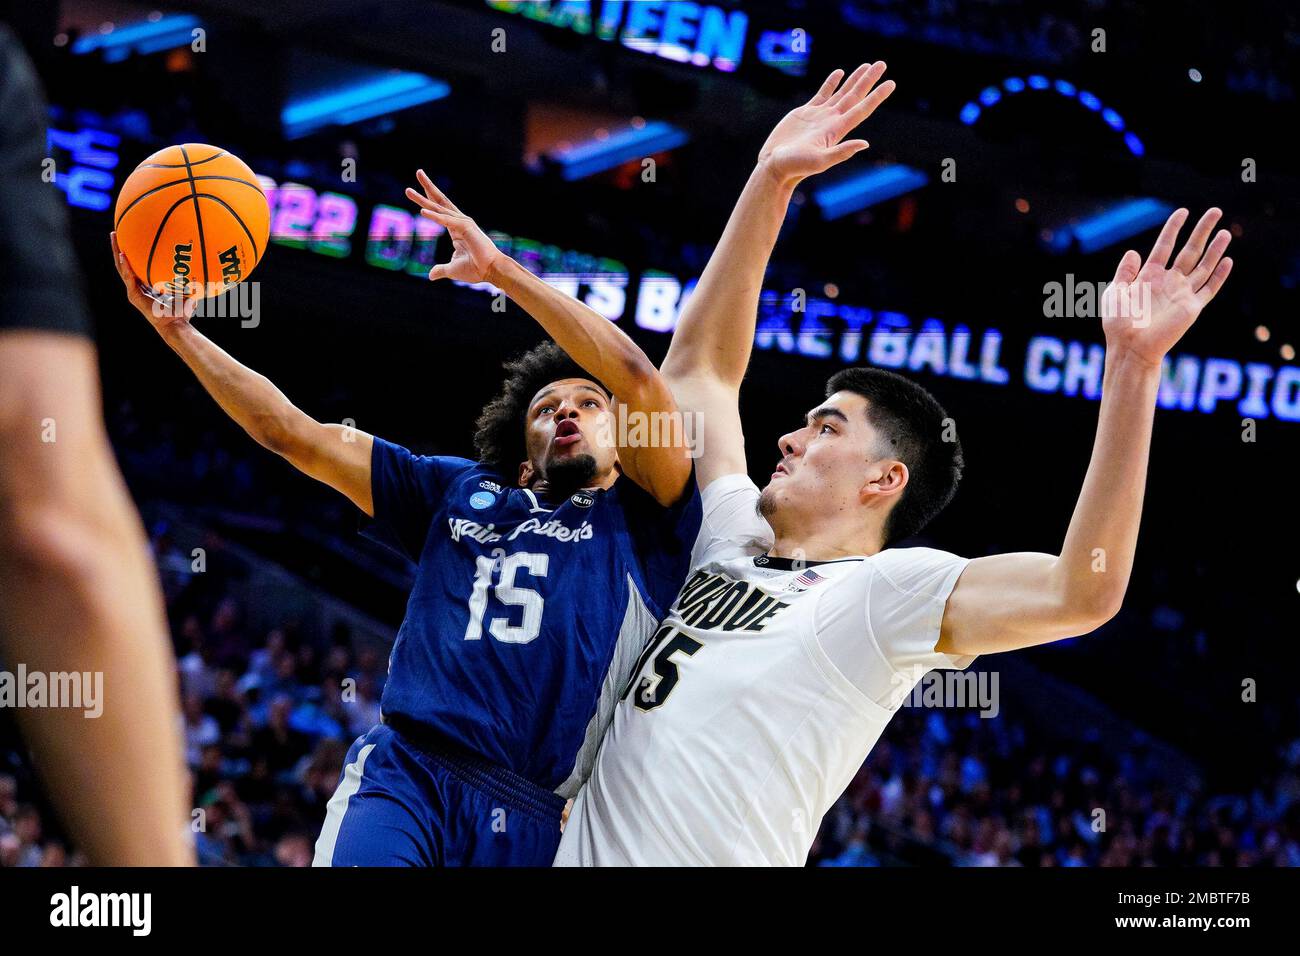 Saint Peter's Matthew Lee, left, goes up for the shot against Purdue 's  Zach Edey, right, during the second half of a college basketball game in  the Sweet 16 round of the